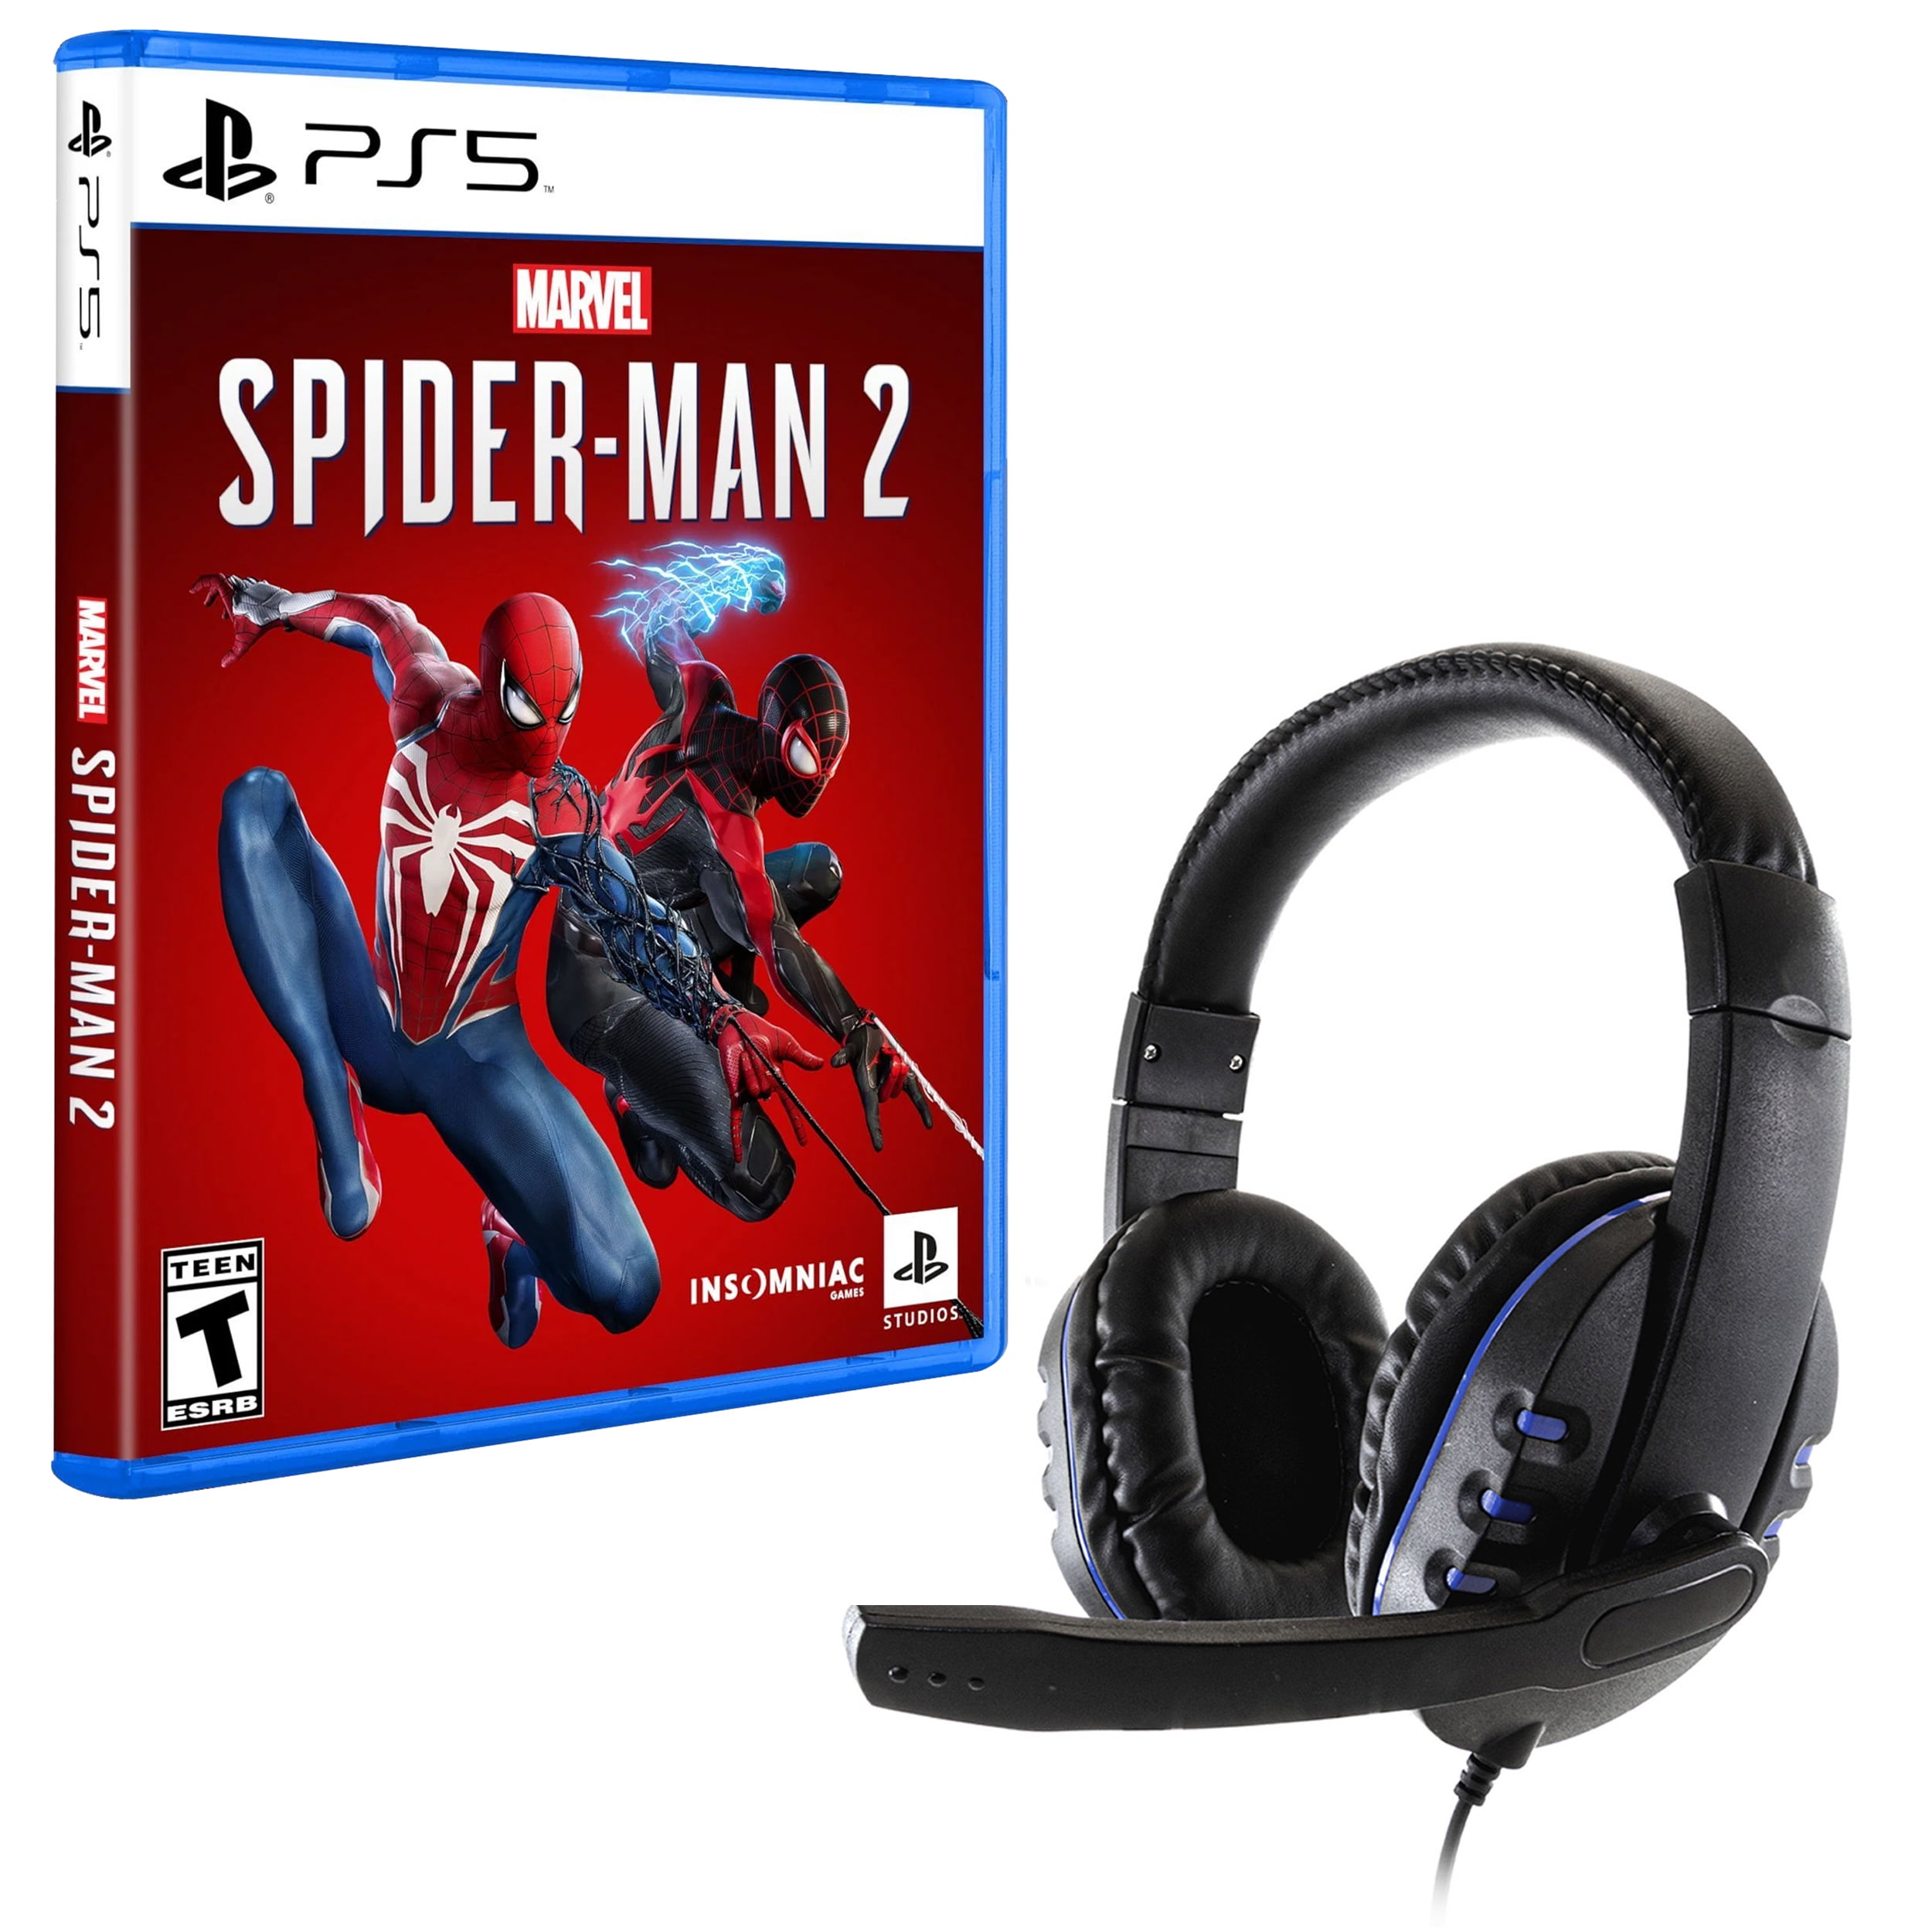 Spider Man 2 Game with Universal Headset 